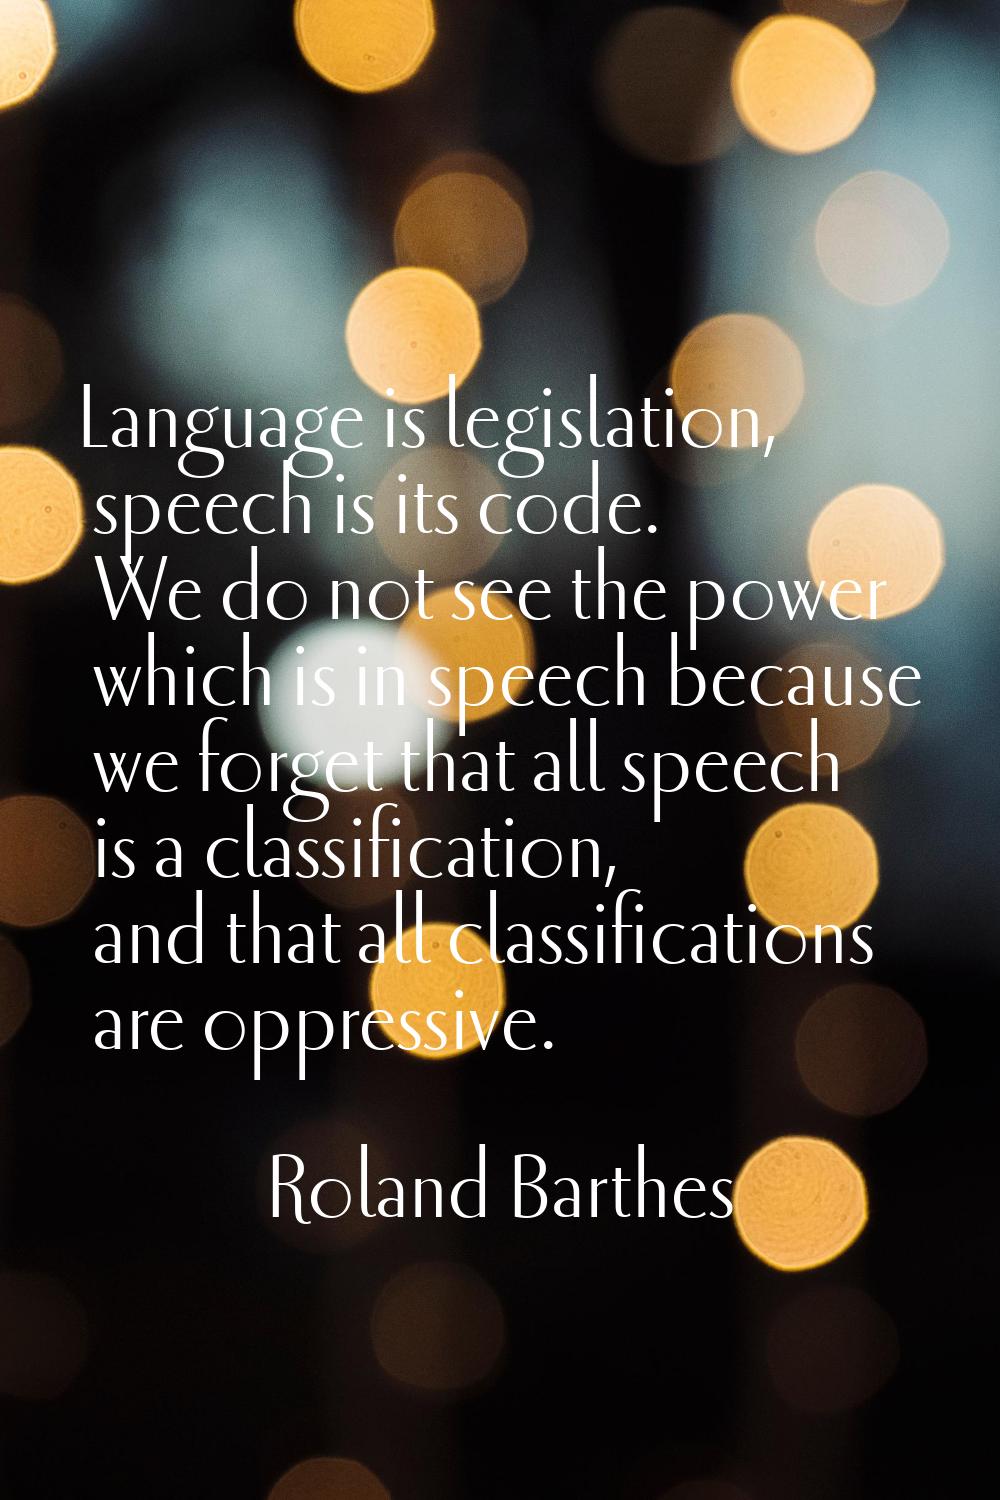 Language is legislation, speech is its code. We do not see the power which is in speech because we 